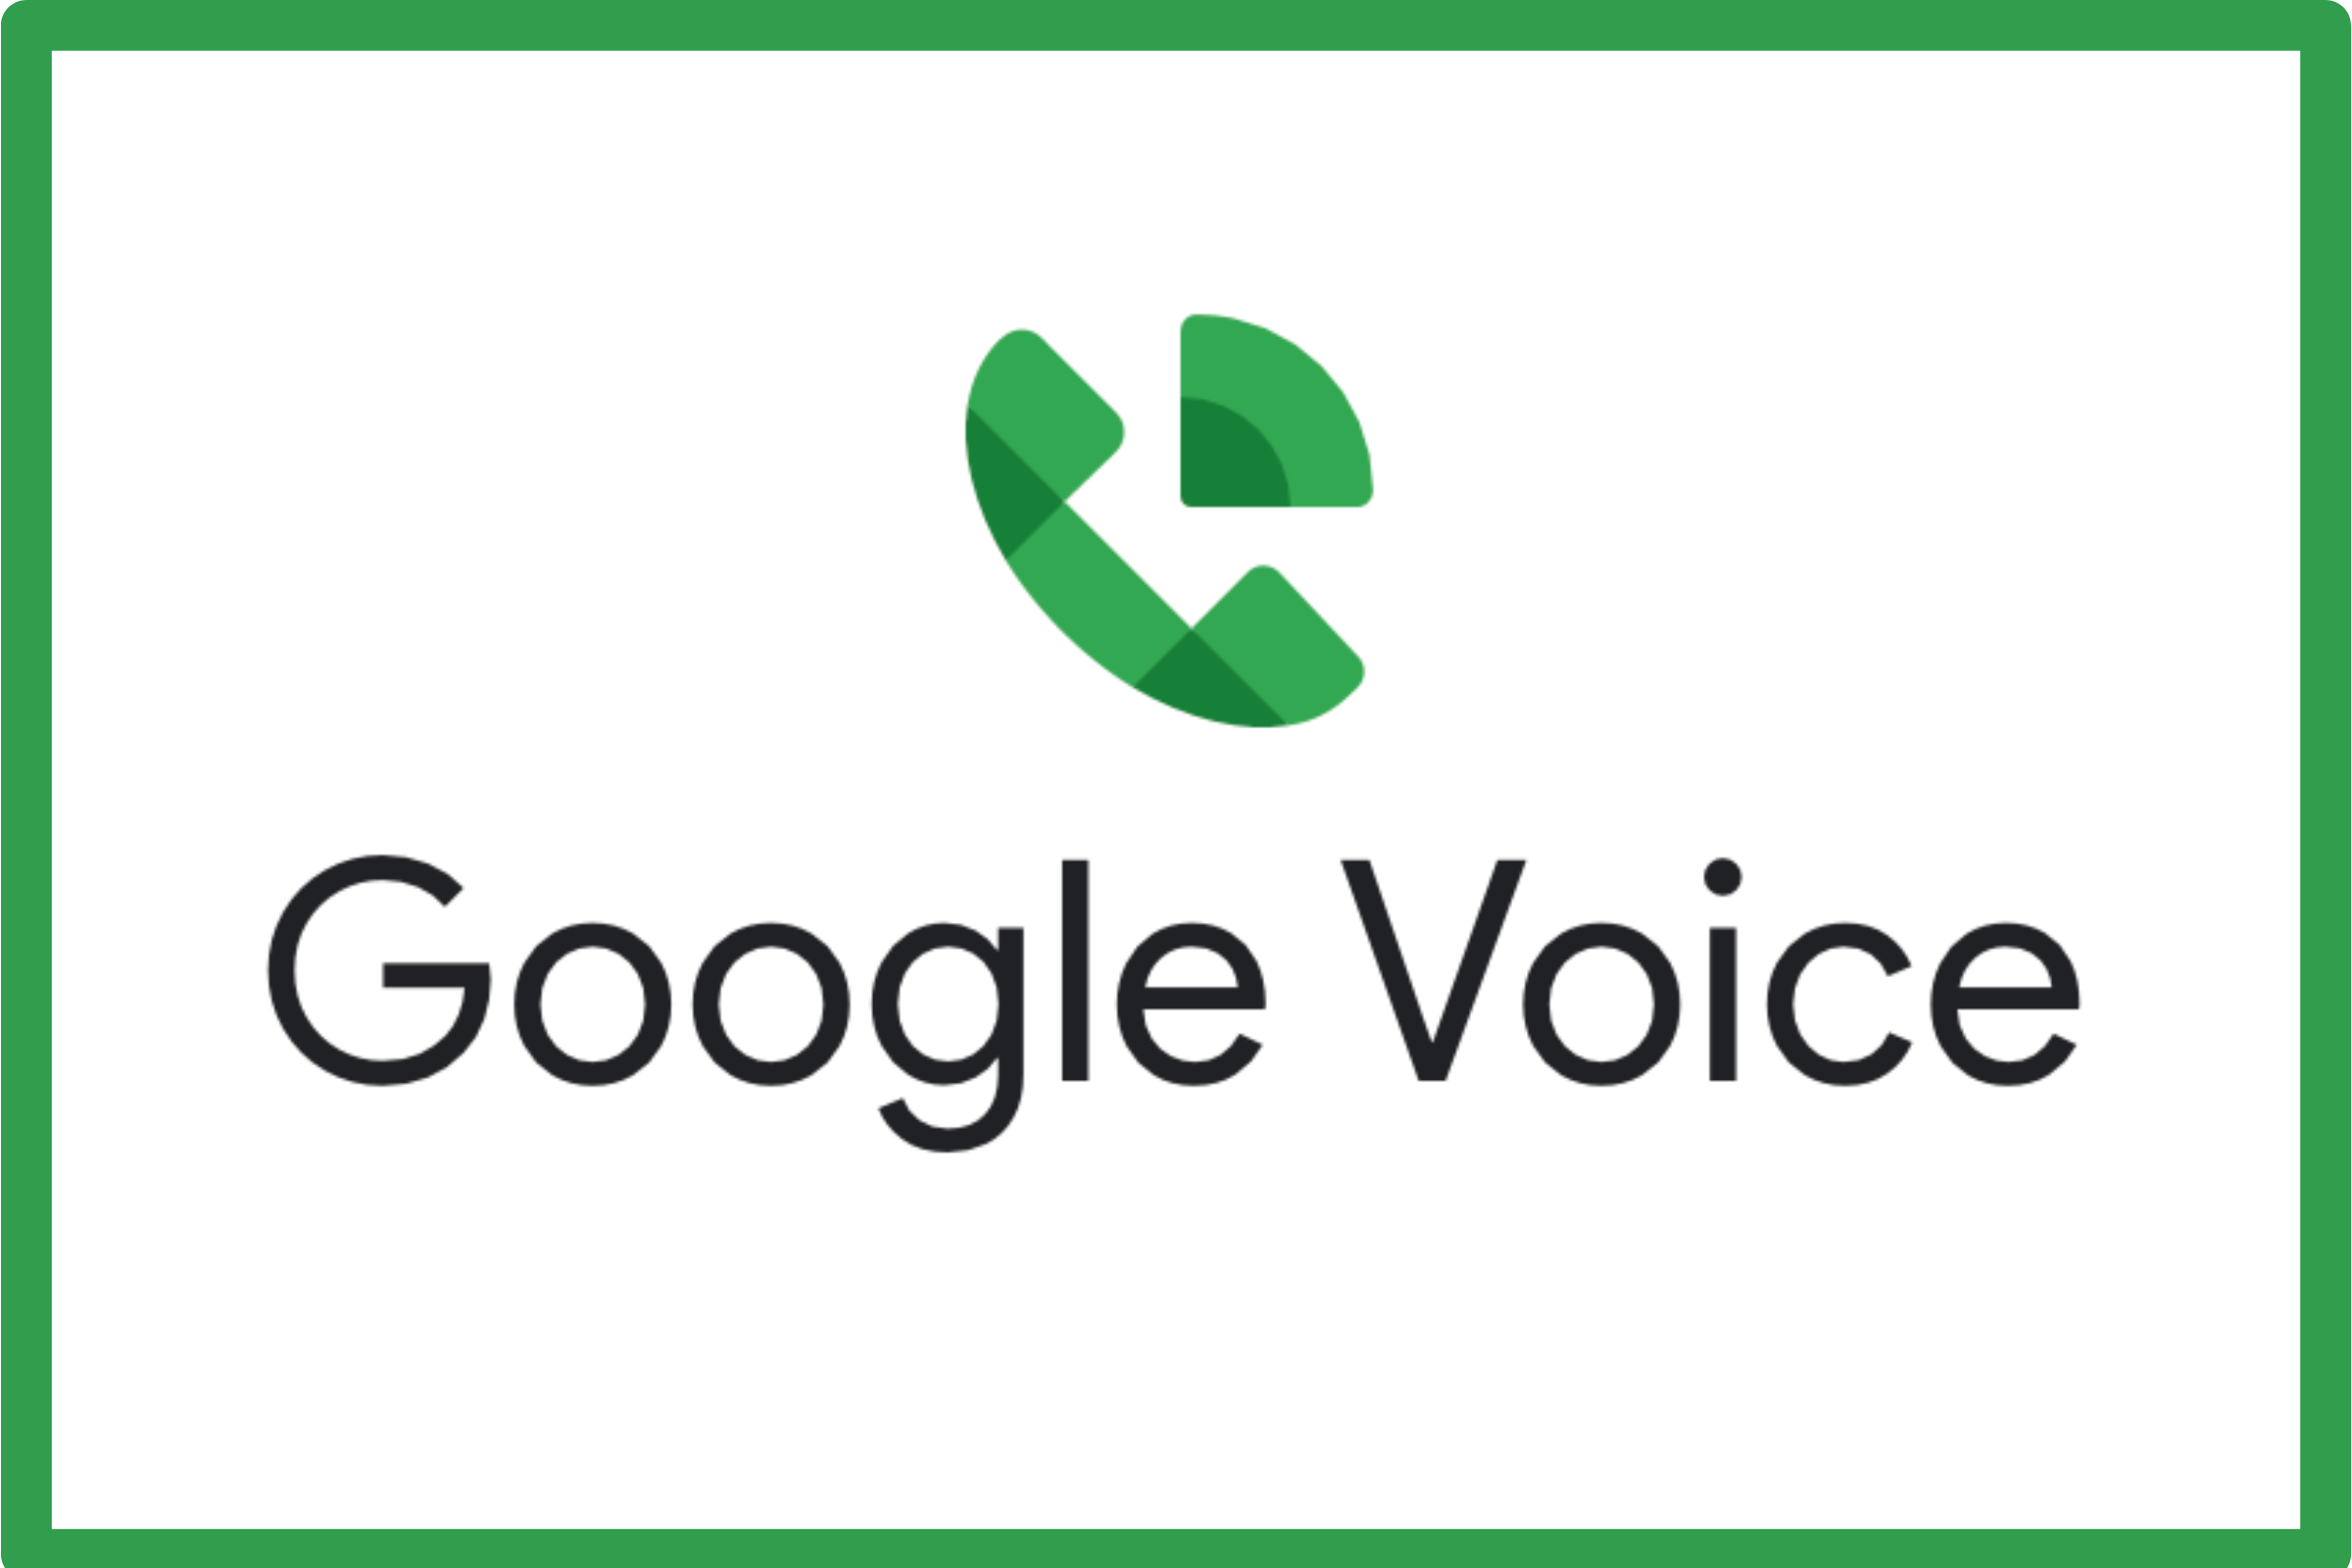 Google Voice logo with green frame 